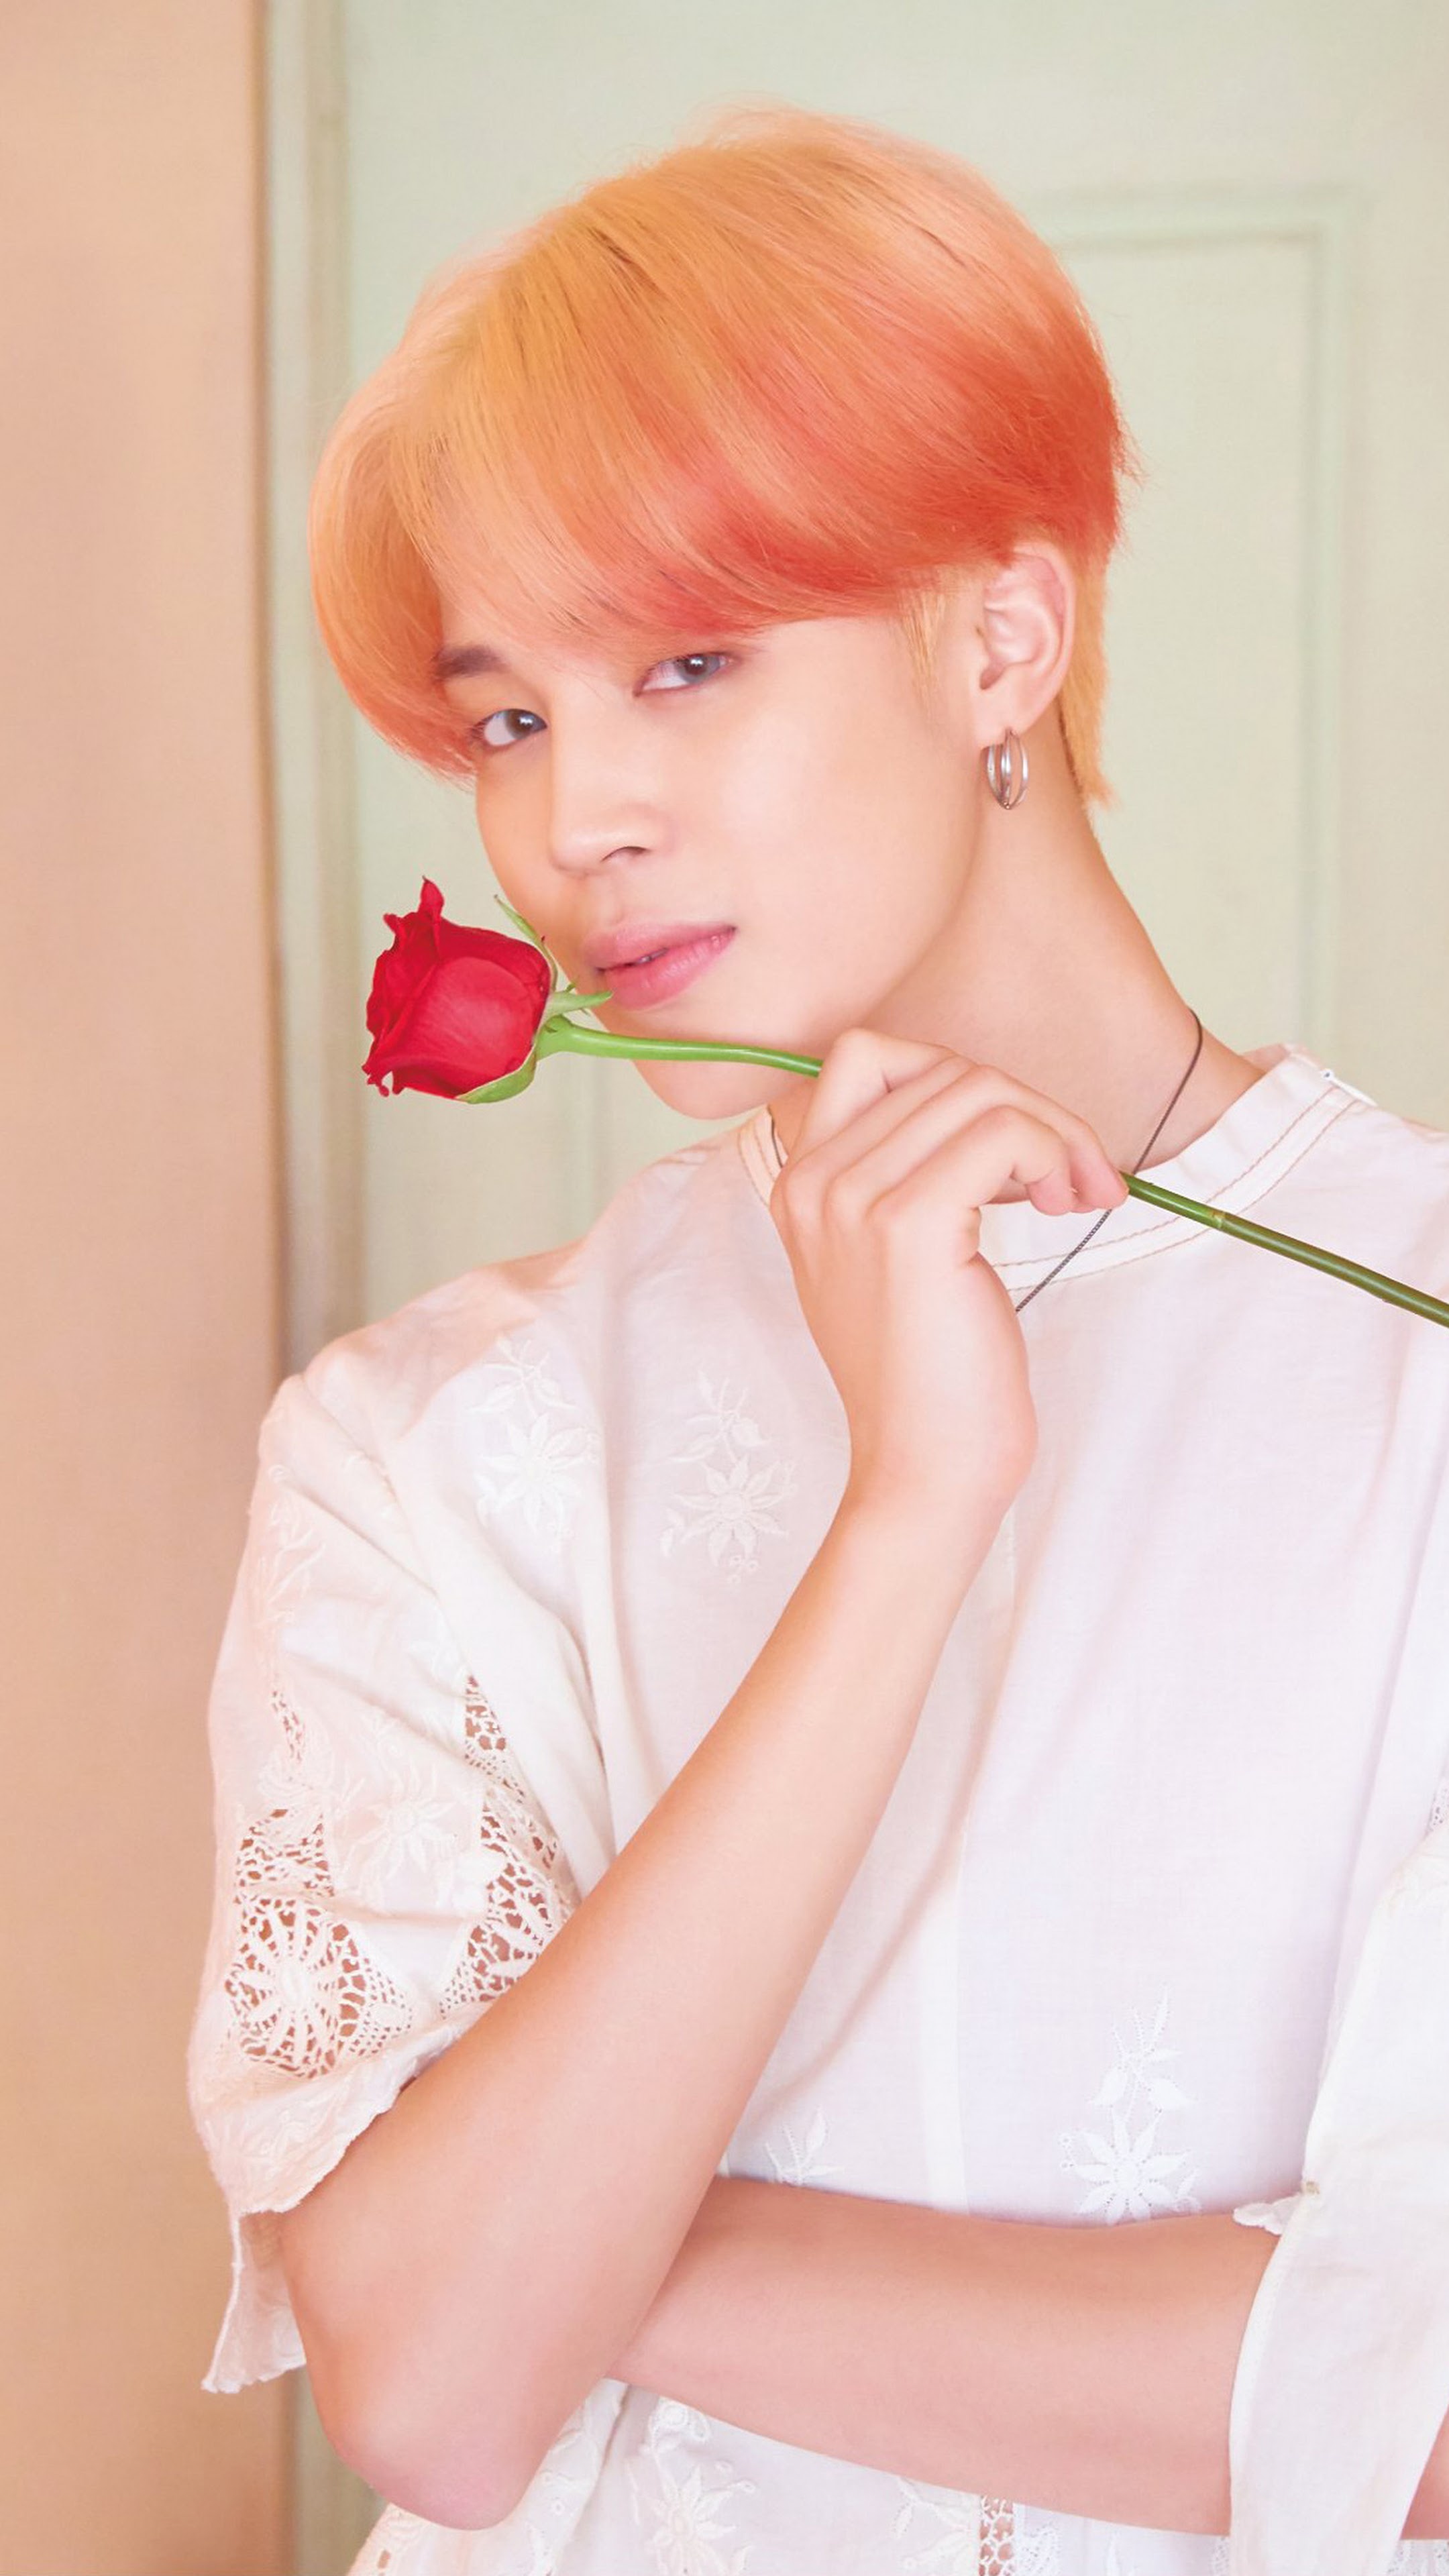 Jimin (BTS), Map of the Soul, Persona, Music, 2160x3840 4K Handy